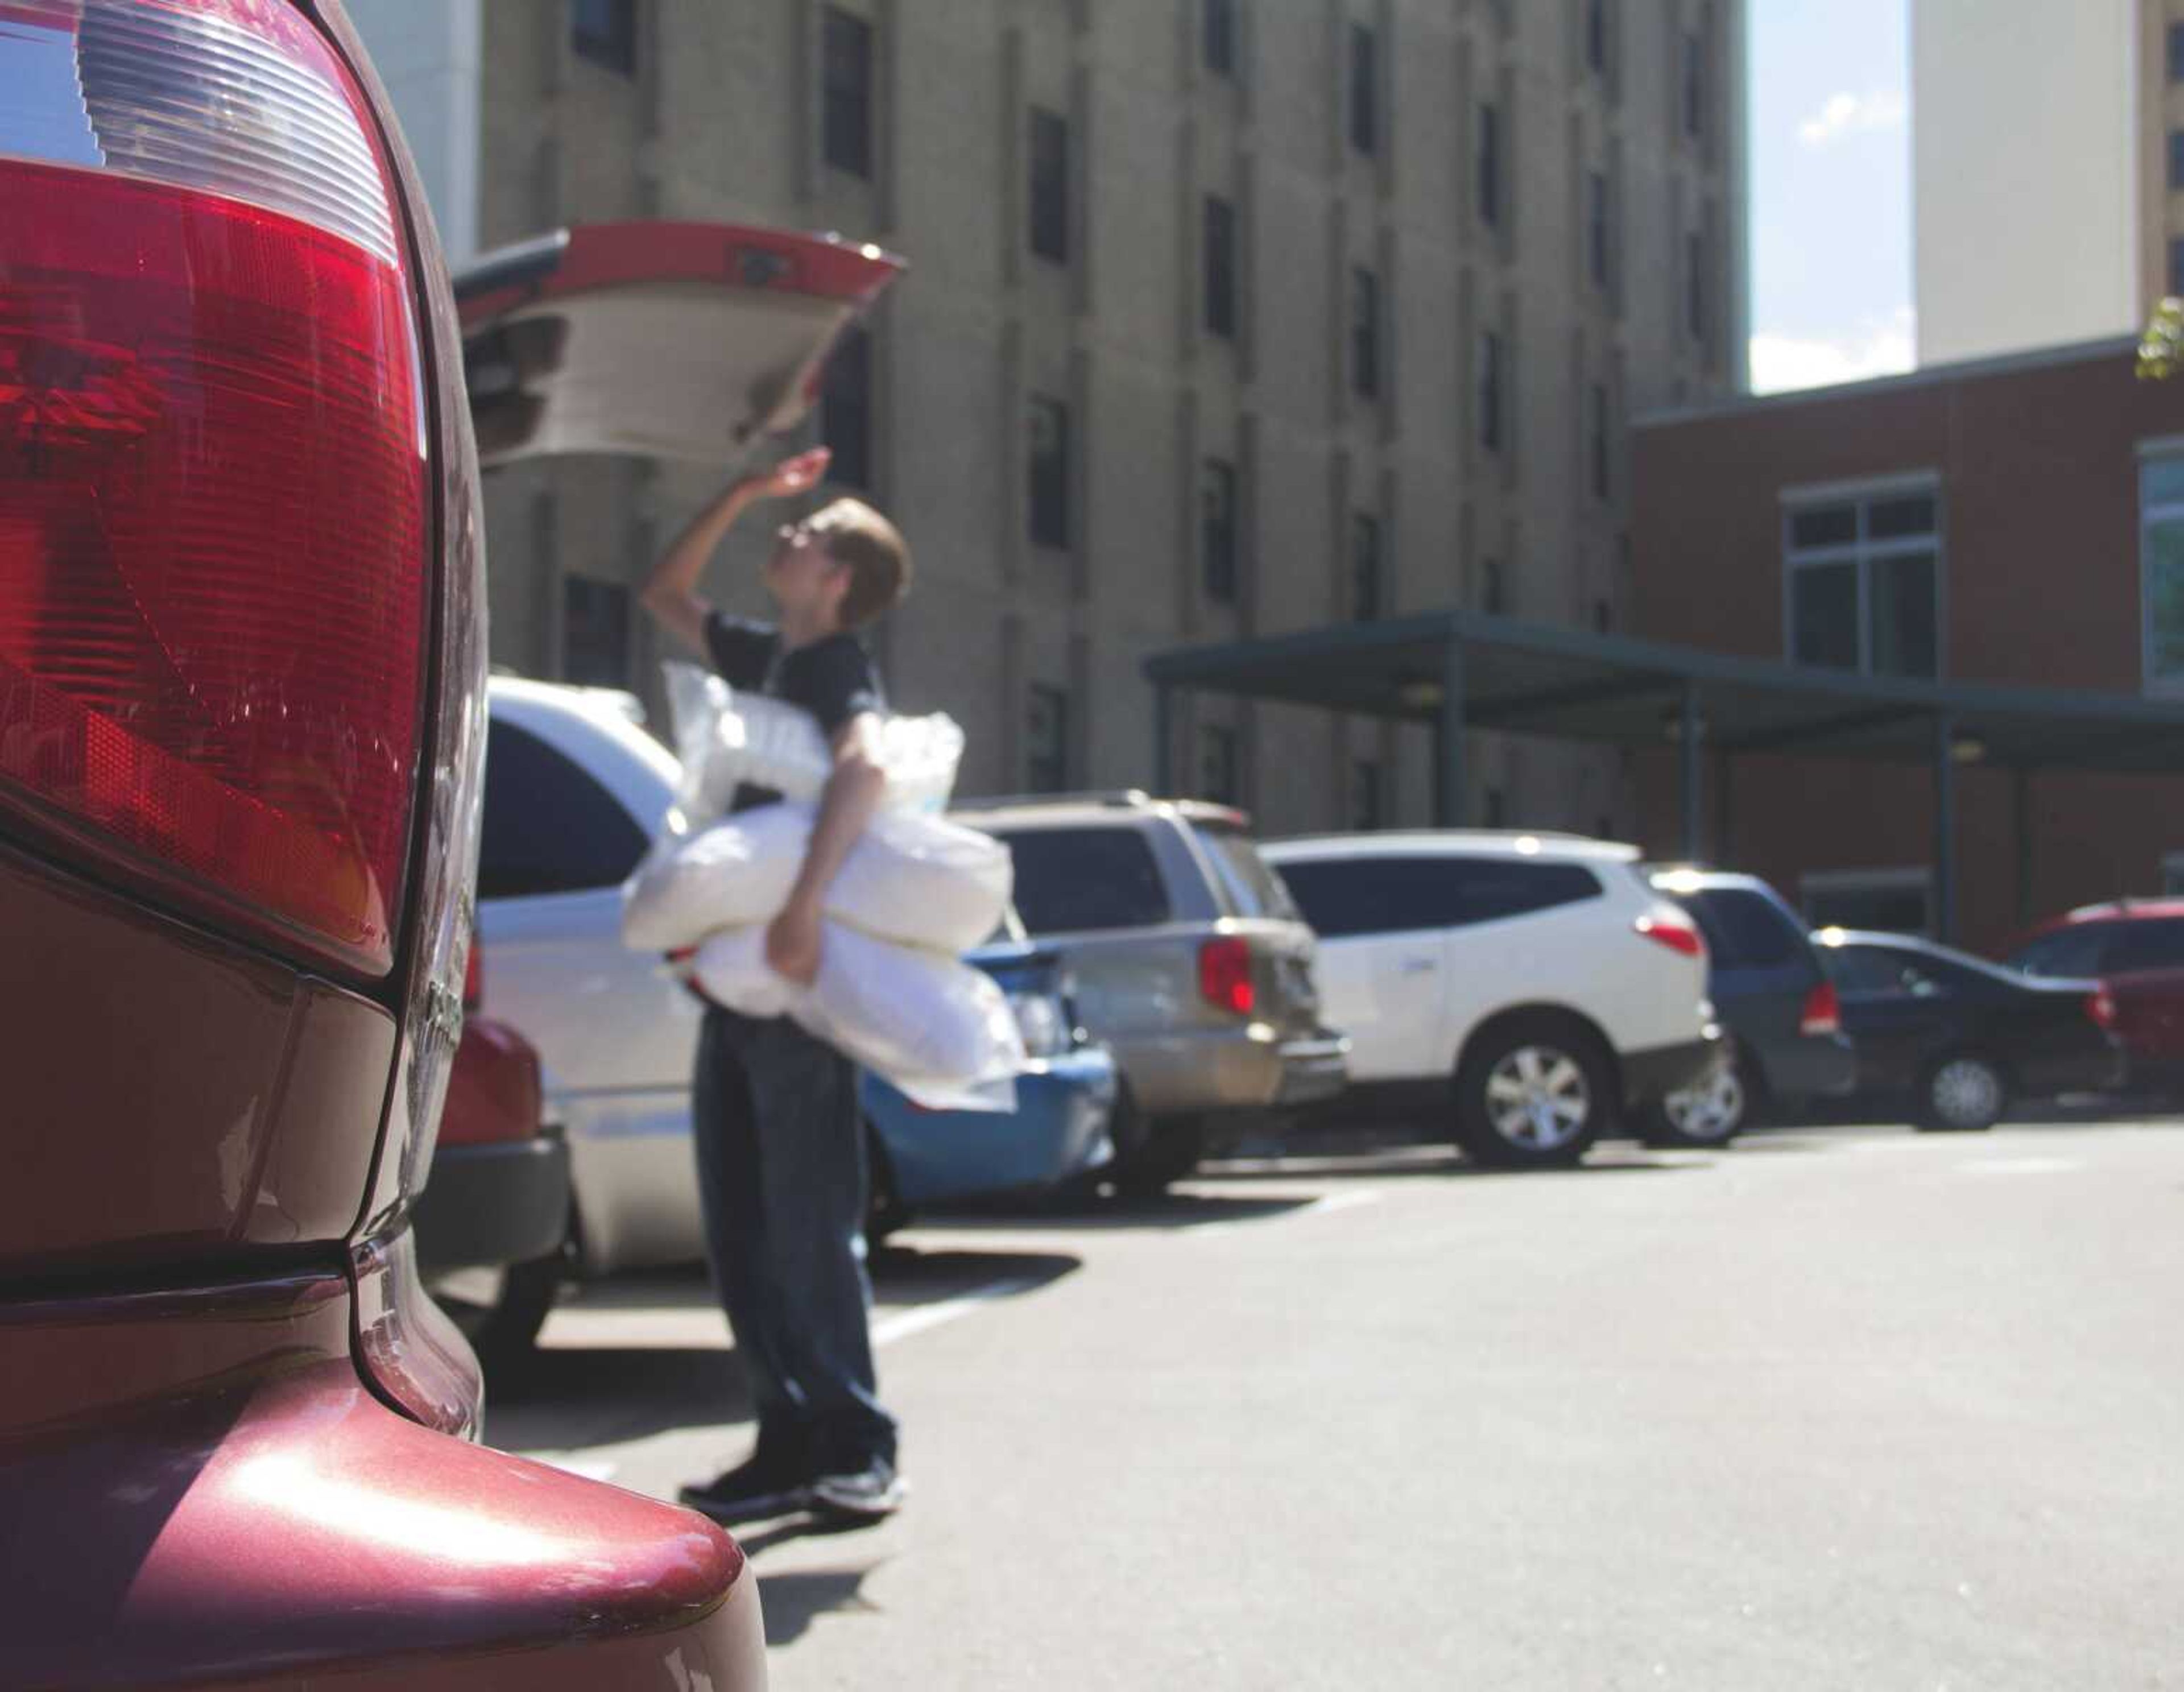 A Southeast student unloads the trunk of a car on move-in day, Aug. 20, in Towers Circle.